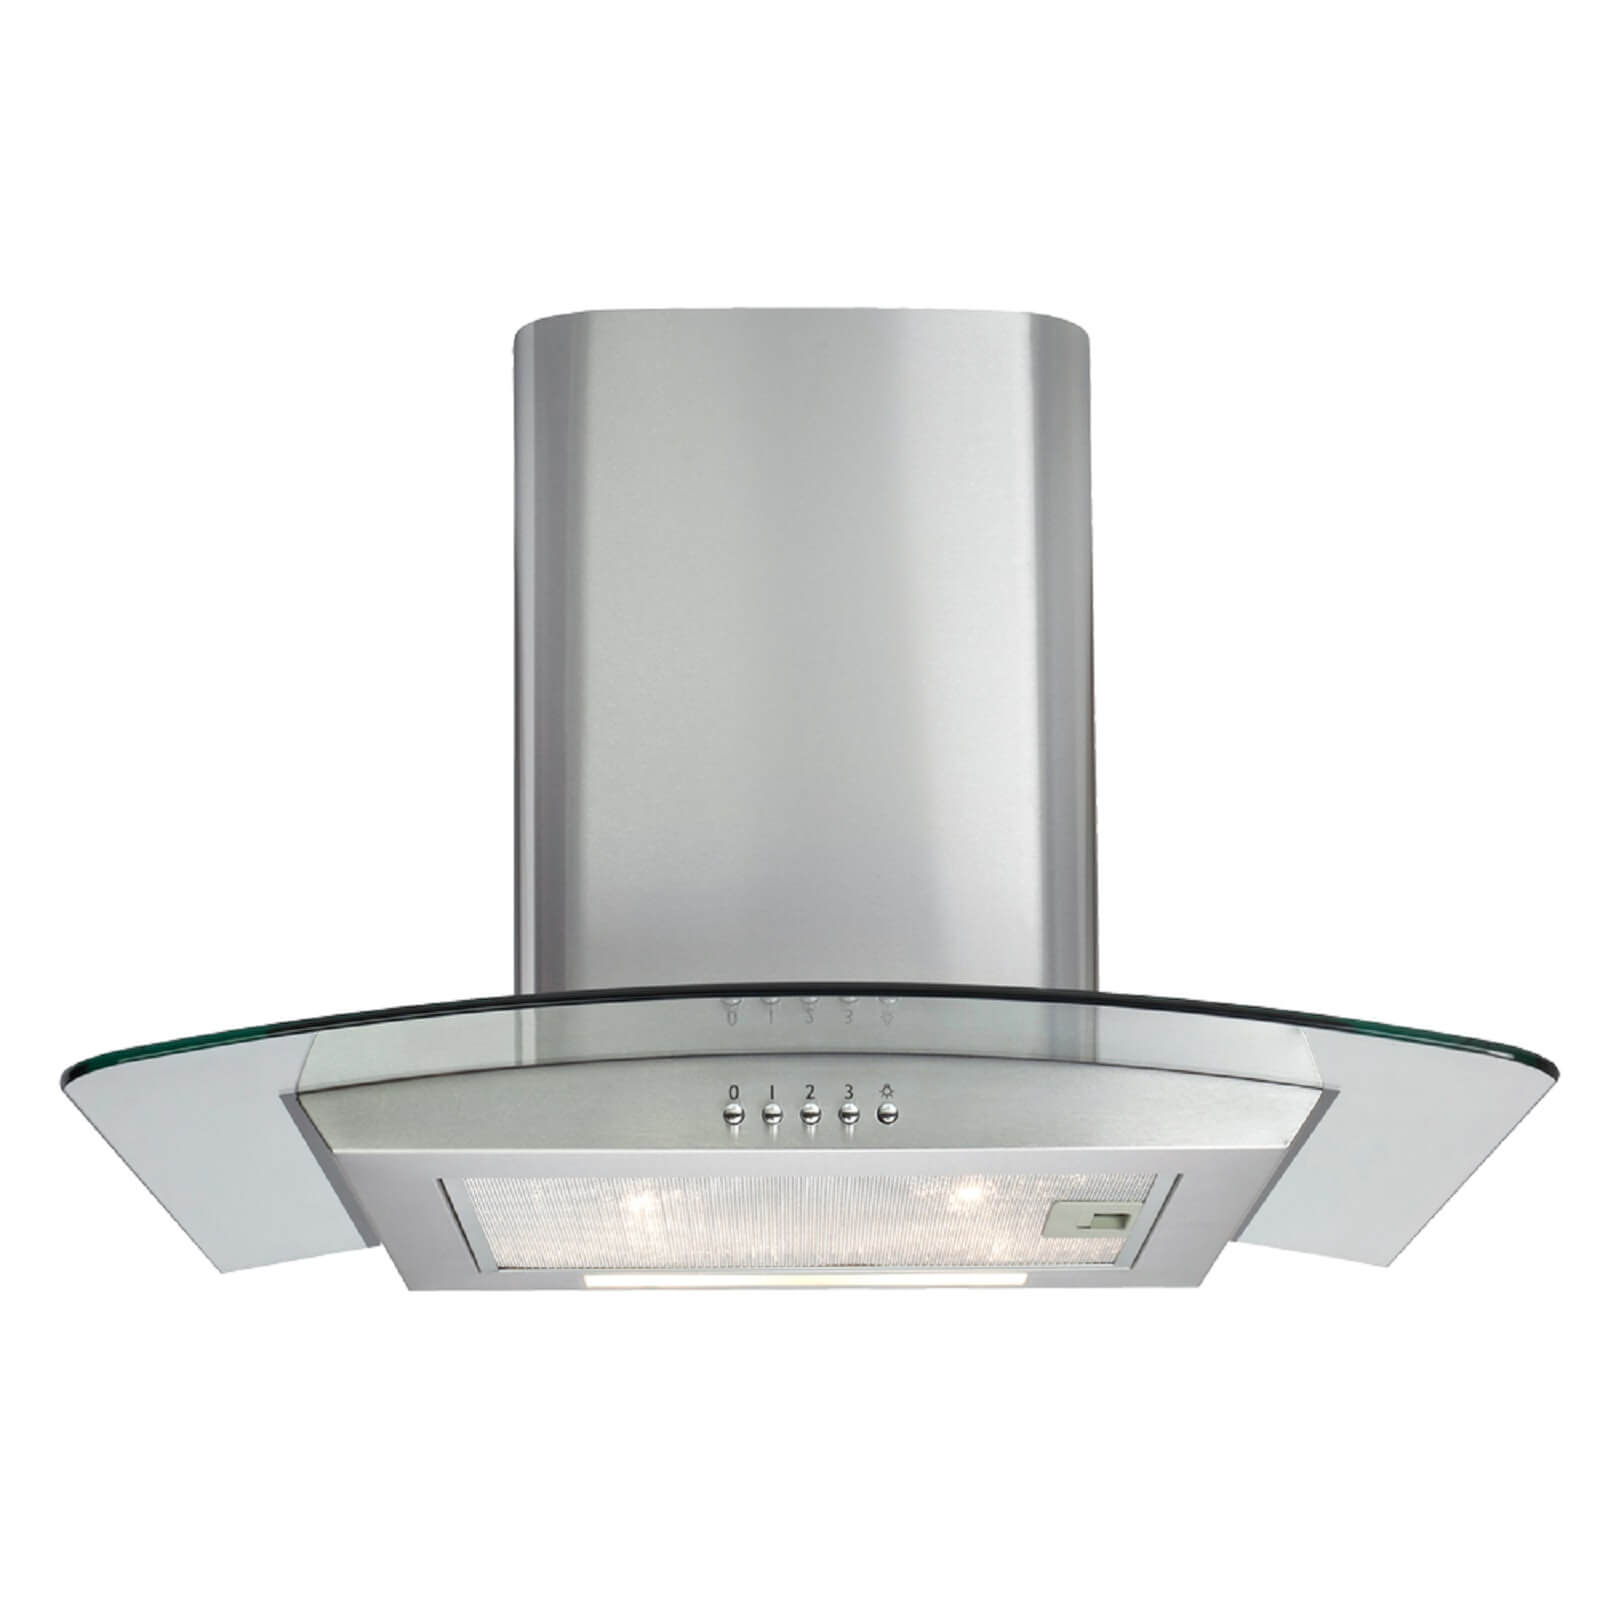 Matrix MEP601SS Curved Glass Chimney Cooker Hood - 60cm - Stainless Steel